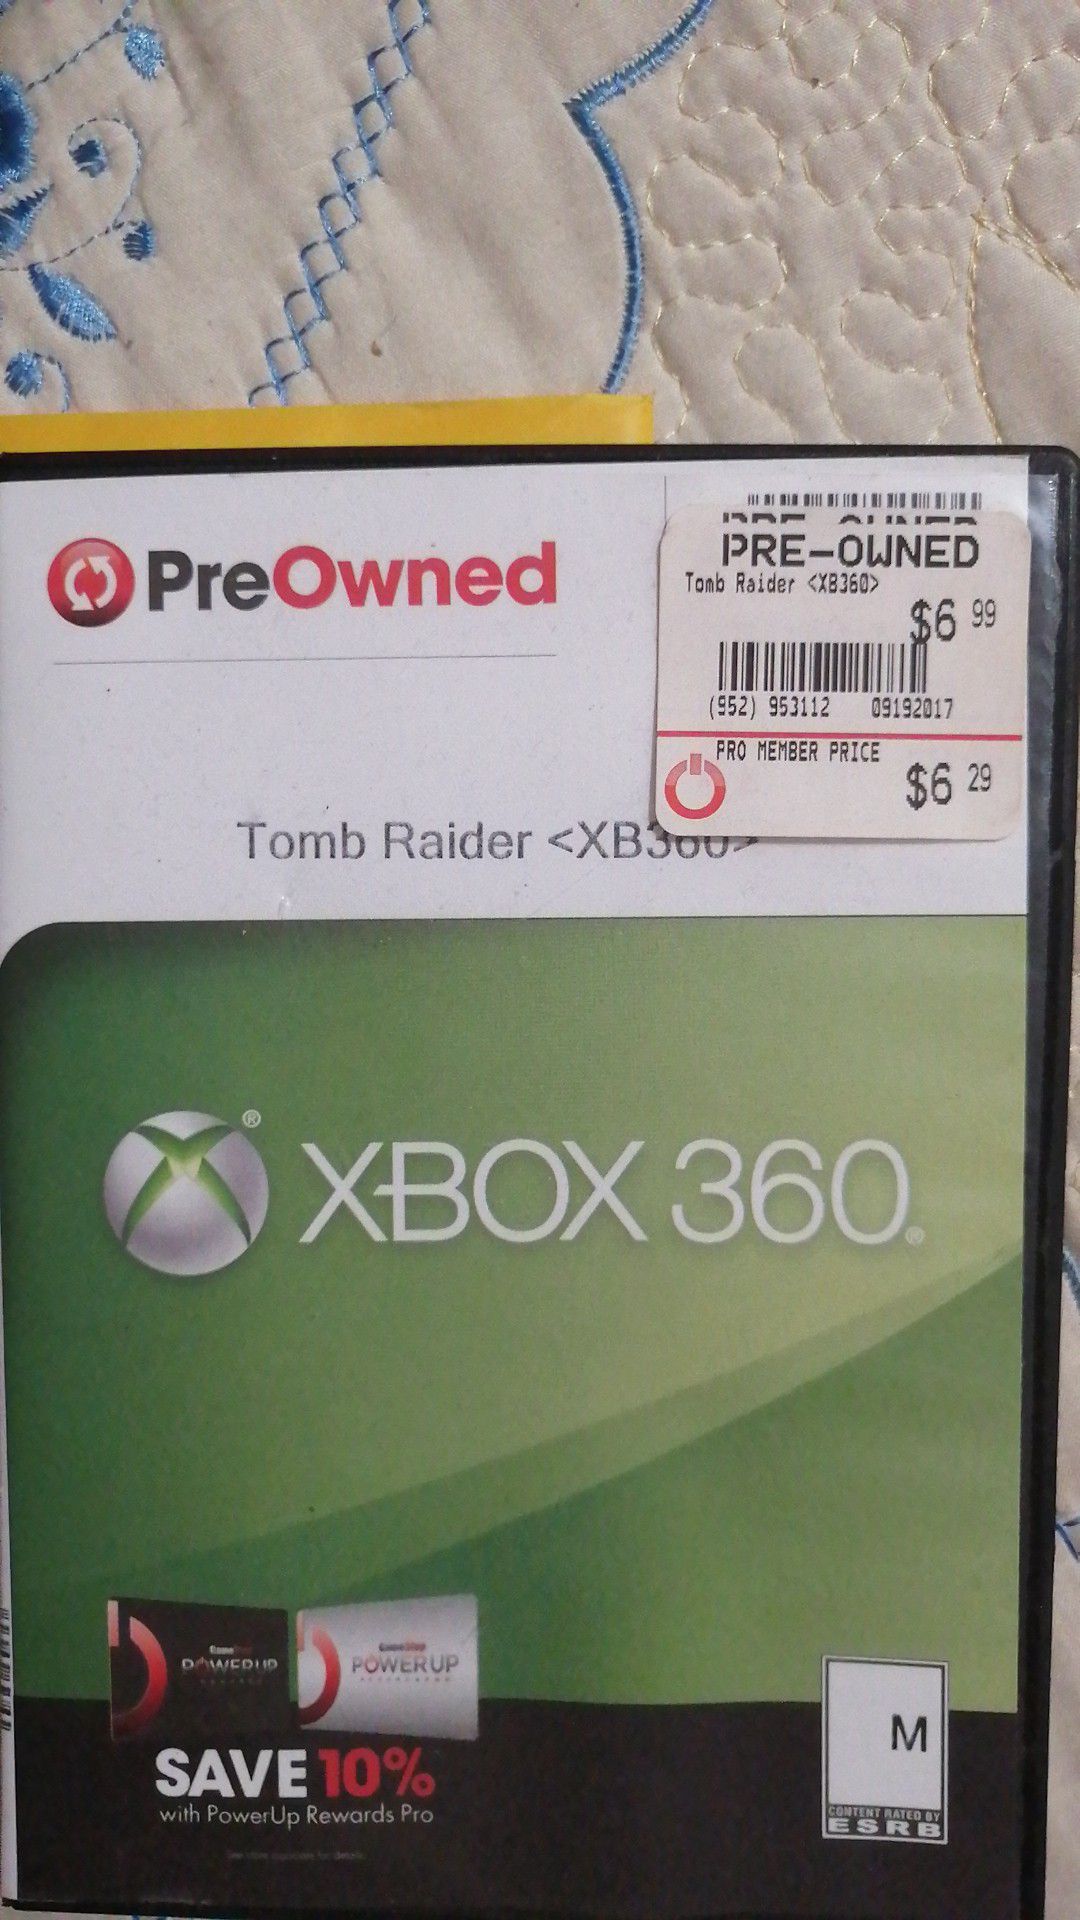 Pre-owned XBOX360 Tomb Raider